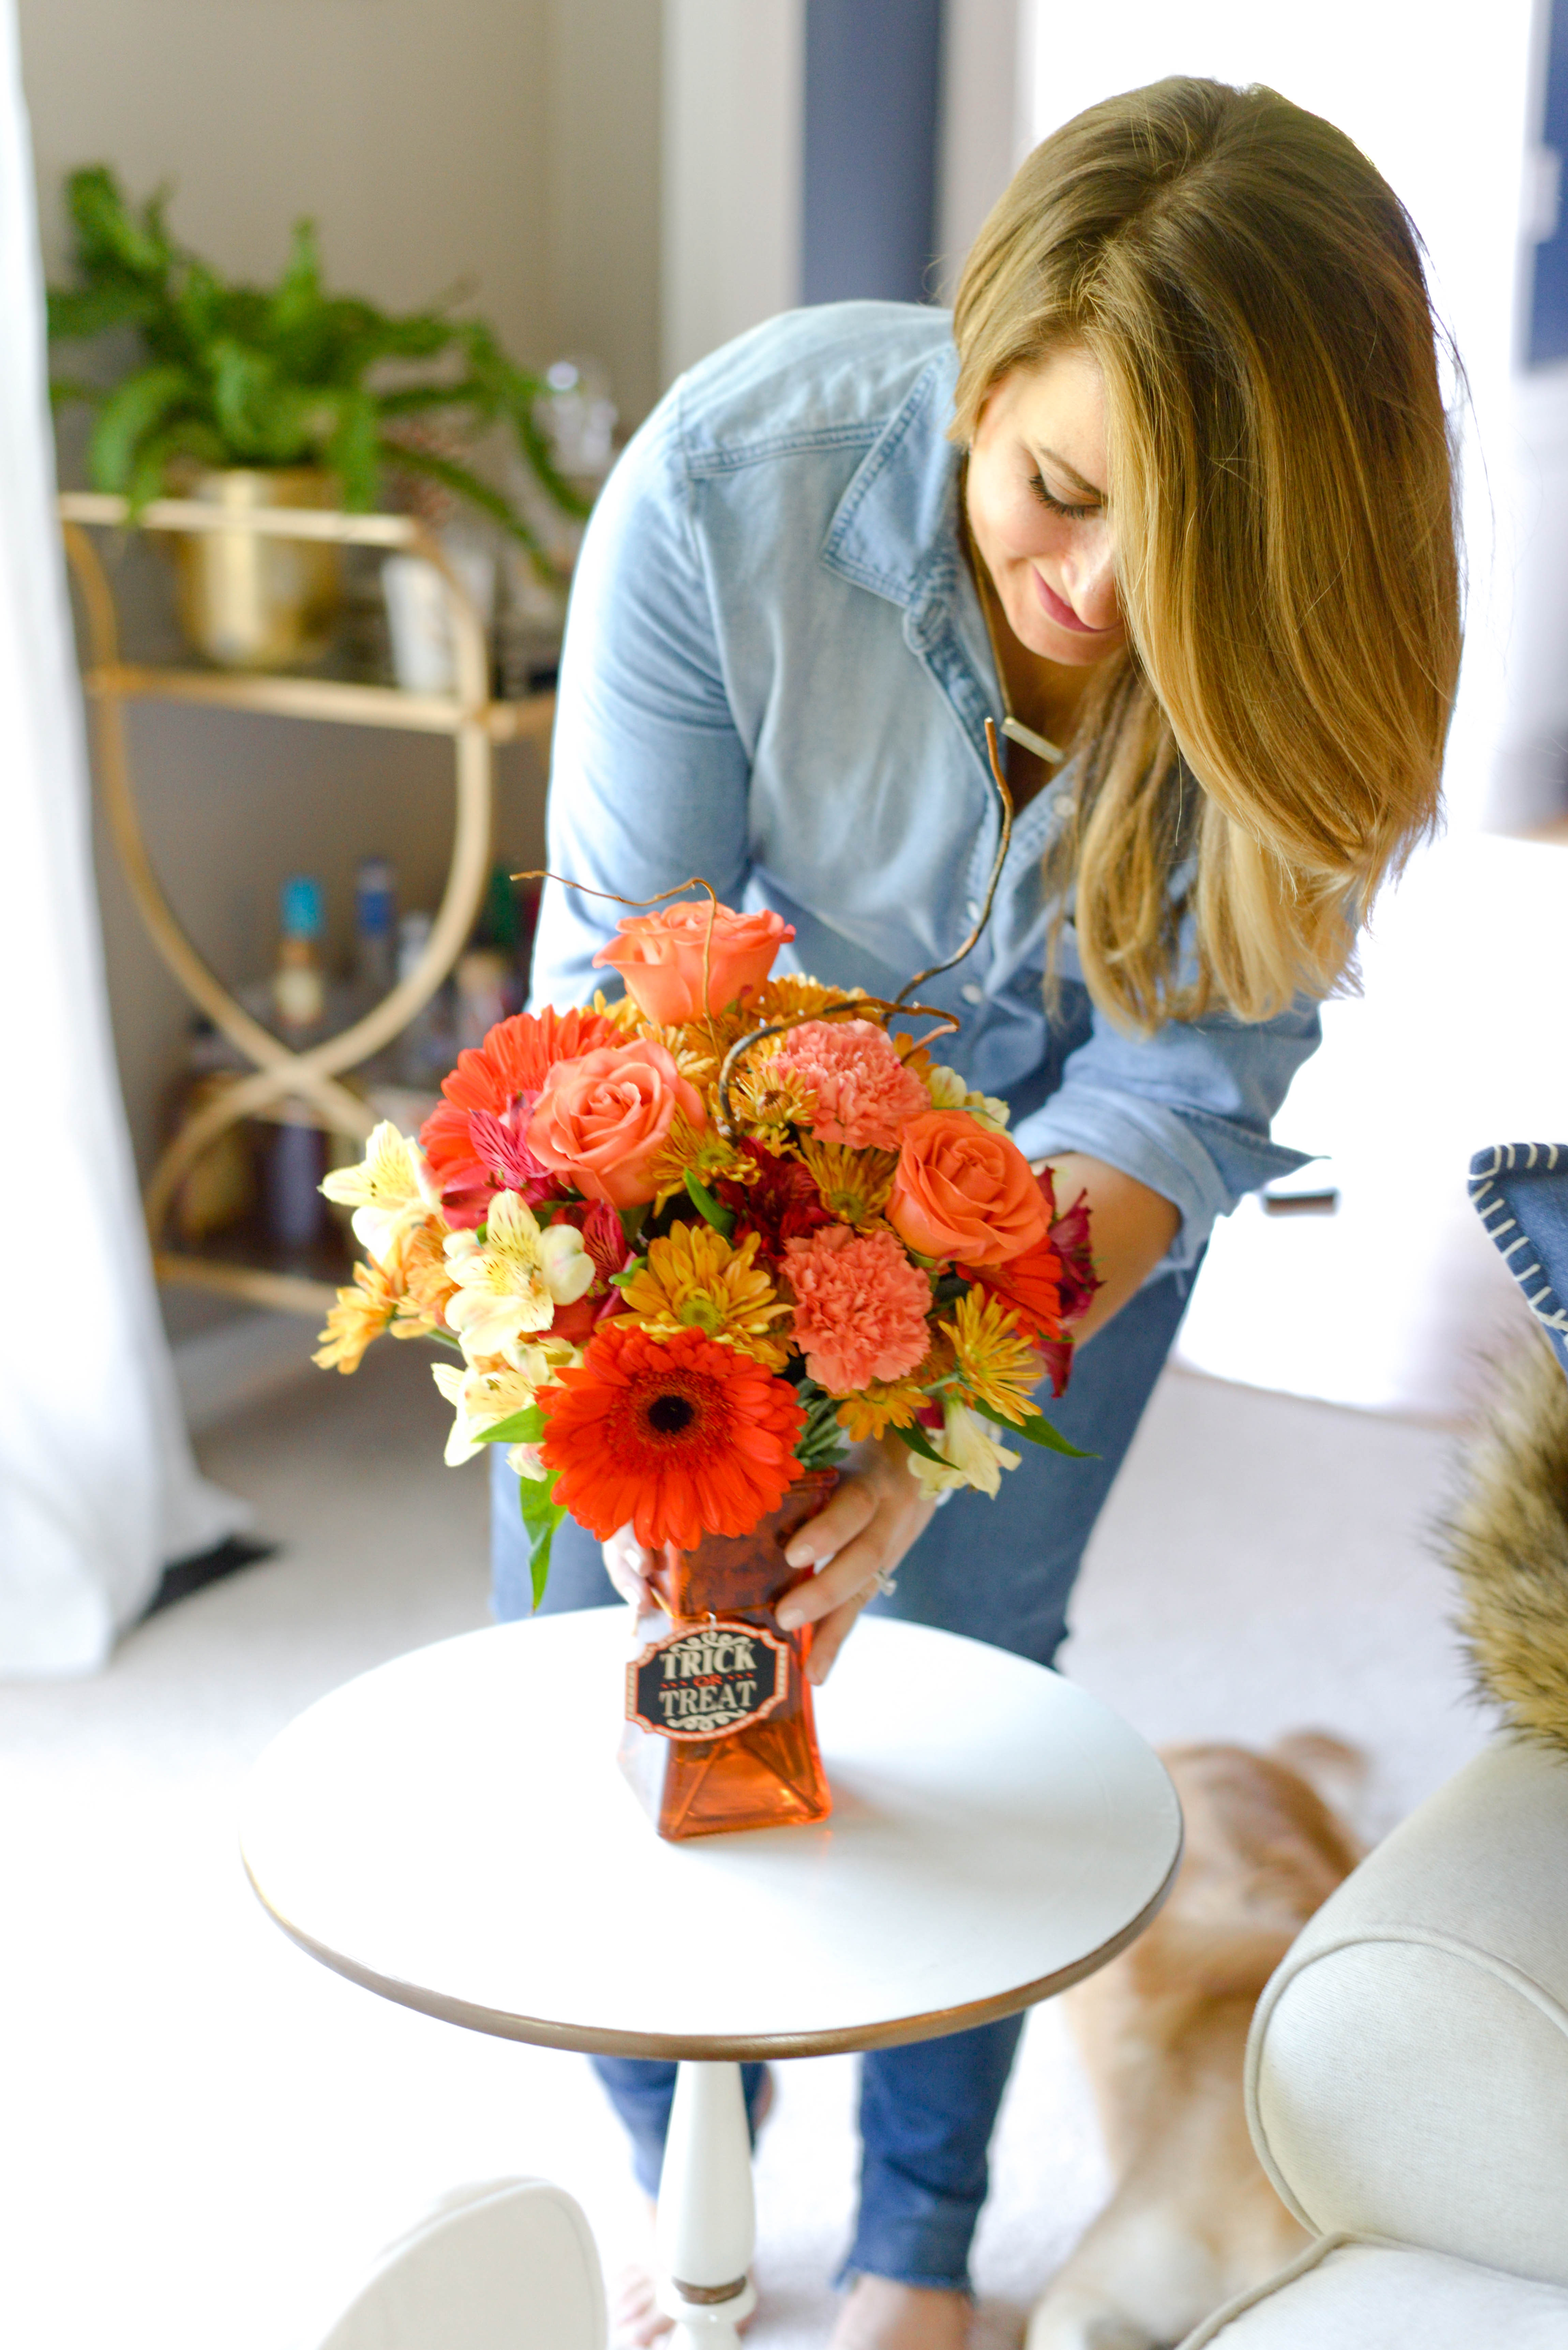 My Fall Home Decor by lifestyle blogger Amy of Coffee Beans and Bobby Pins